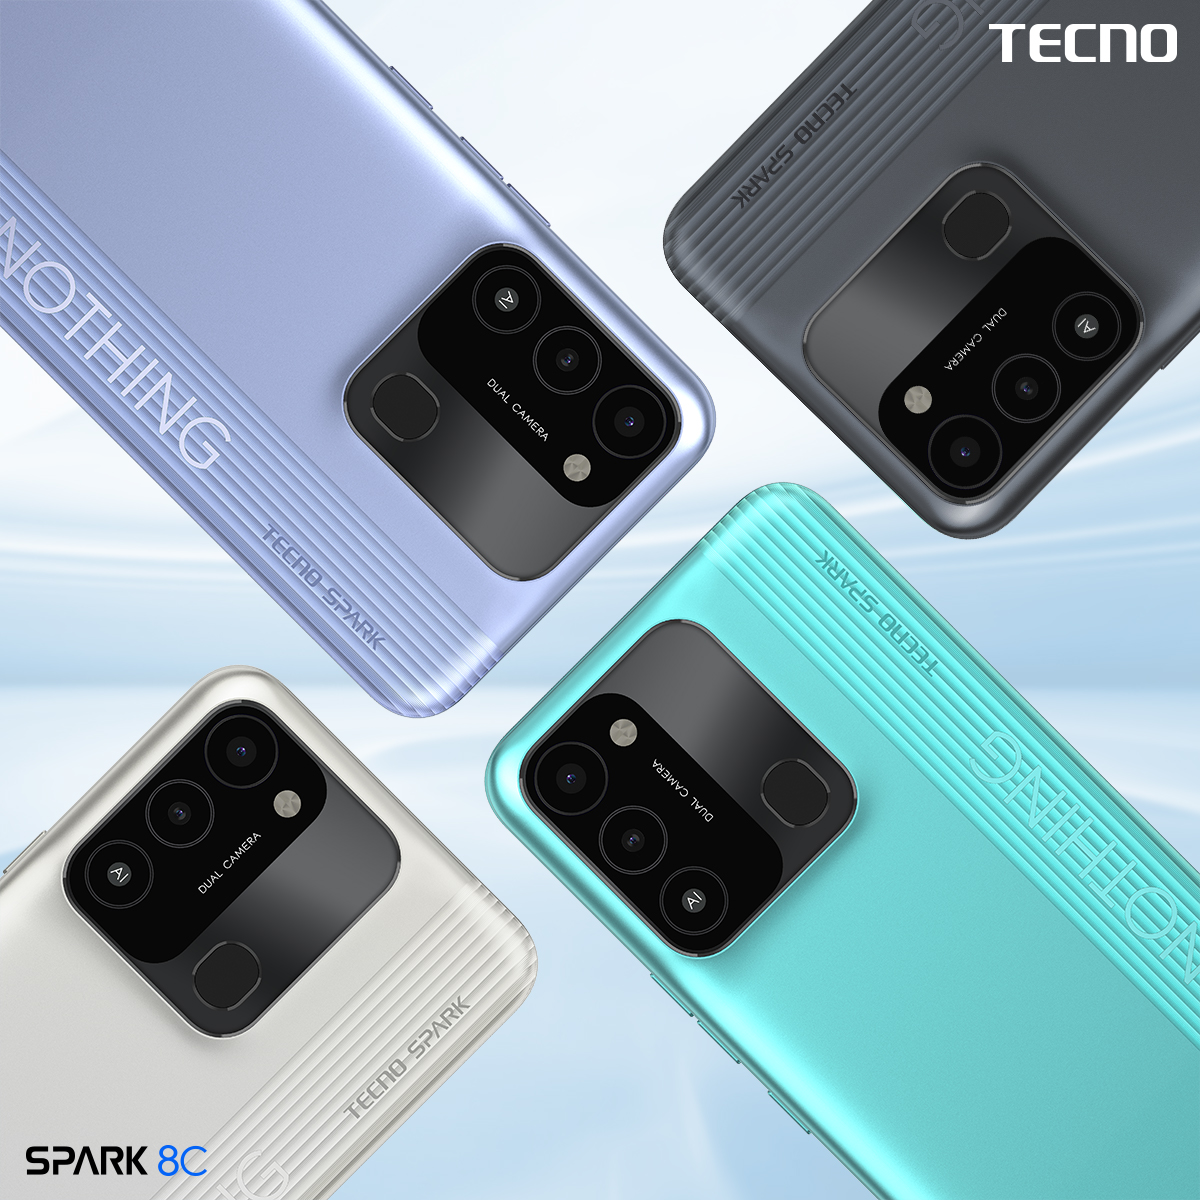 4 delightful choices. We've got perfect options for you with Diamond Grey, Turquoise Cyan, Magnet Black, and Iris Purple colors of #TecnoSpark8C!

#SPARK8C #TECNOAfghanistan